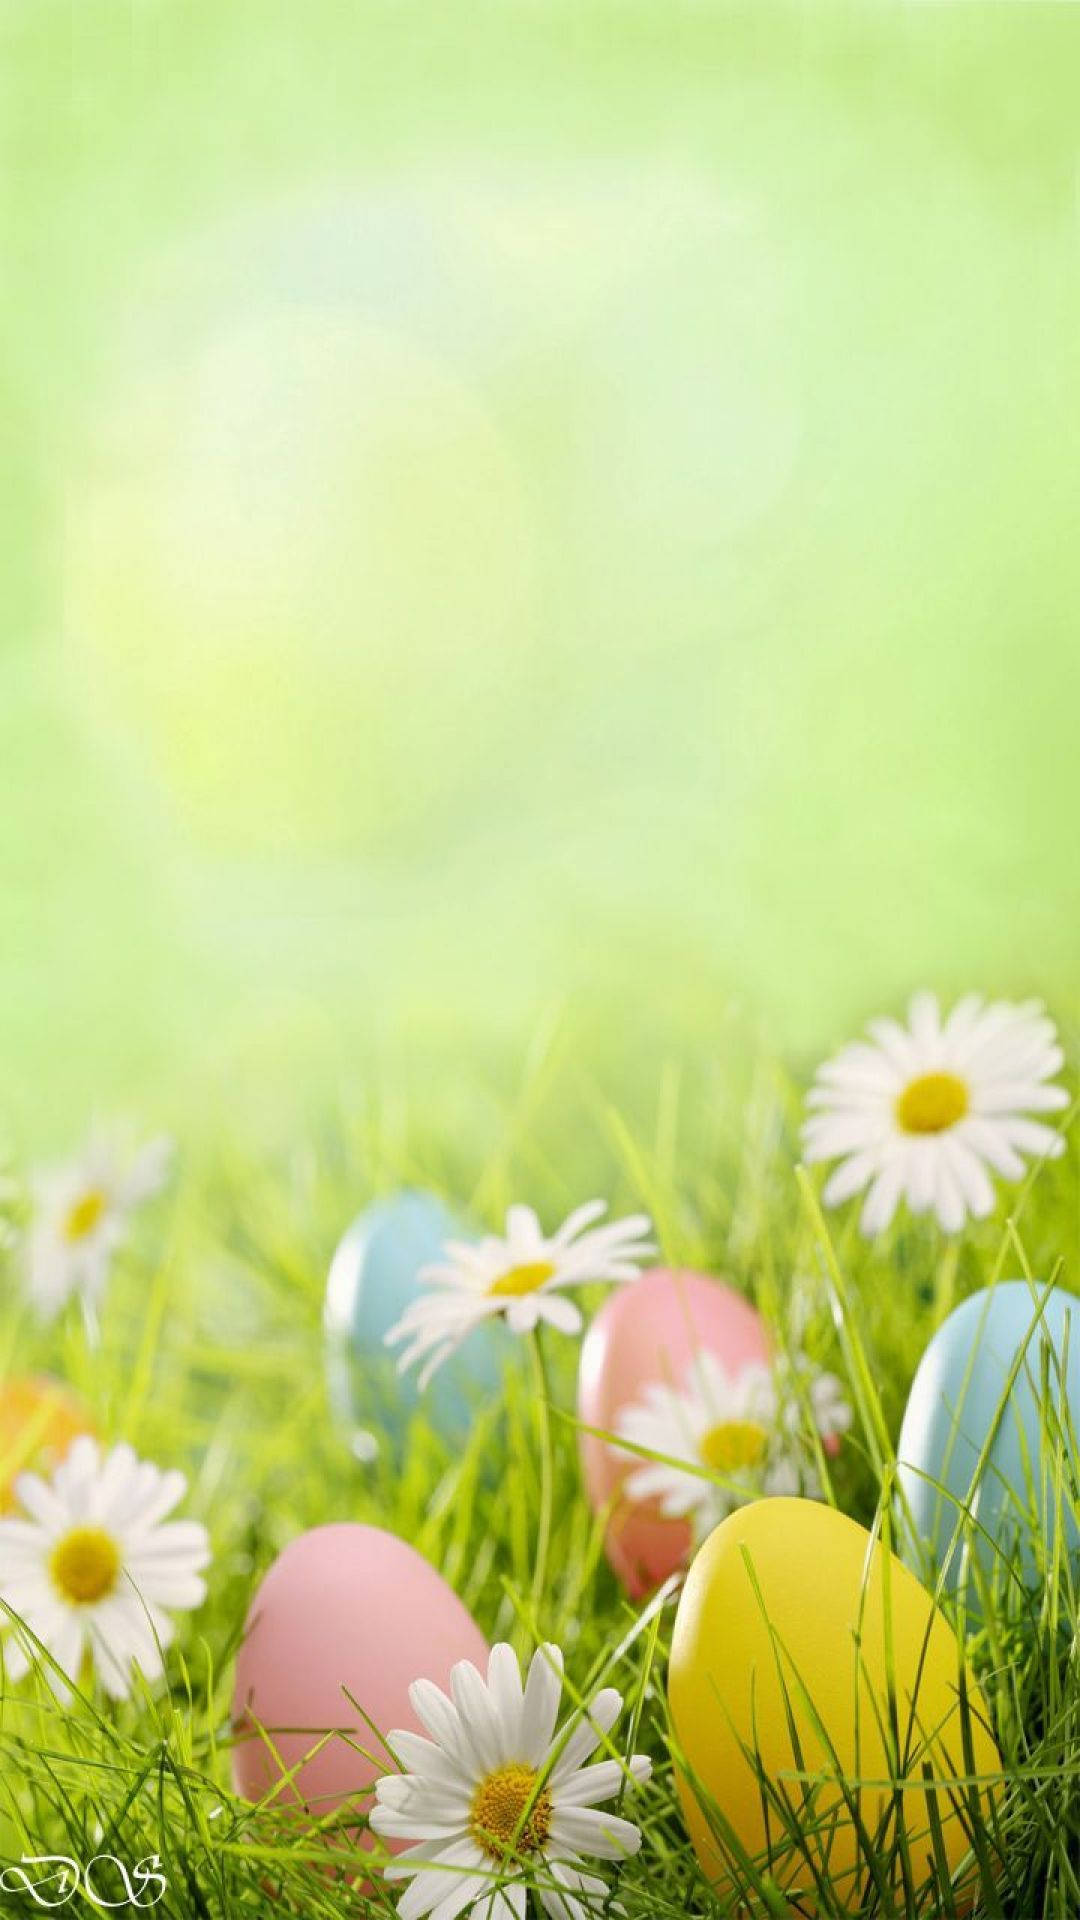 Get ready for Easter with our latest smartphone model Wallpaper